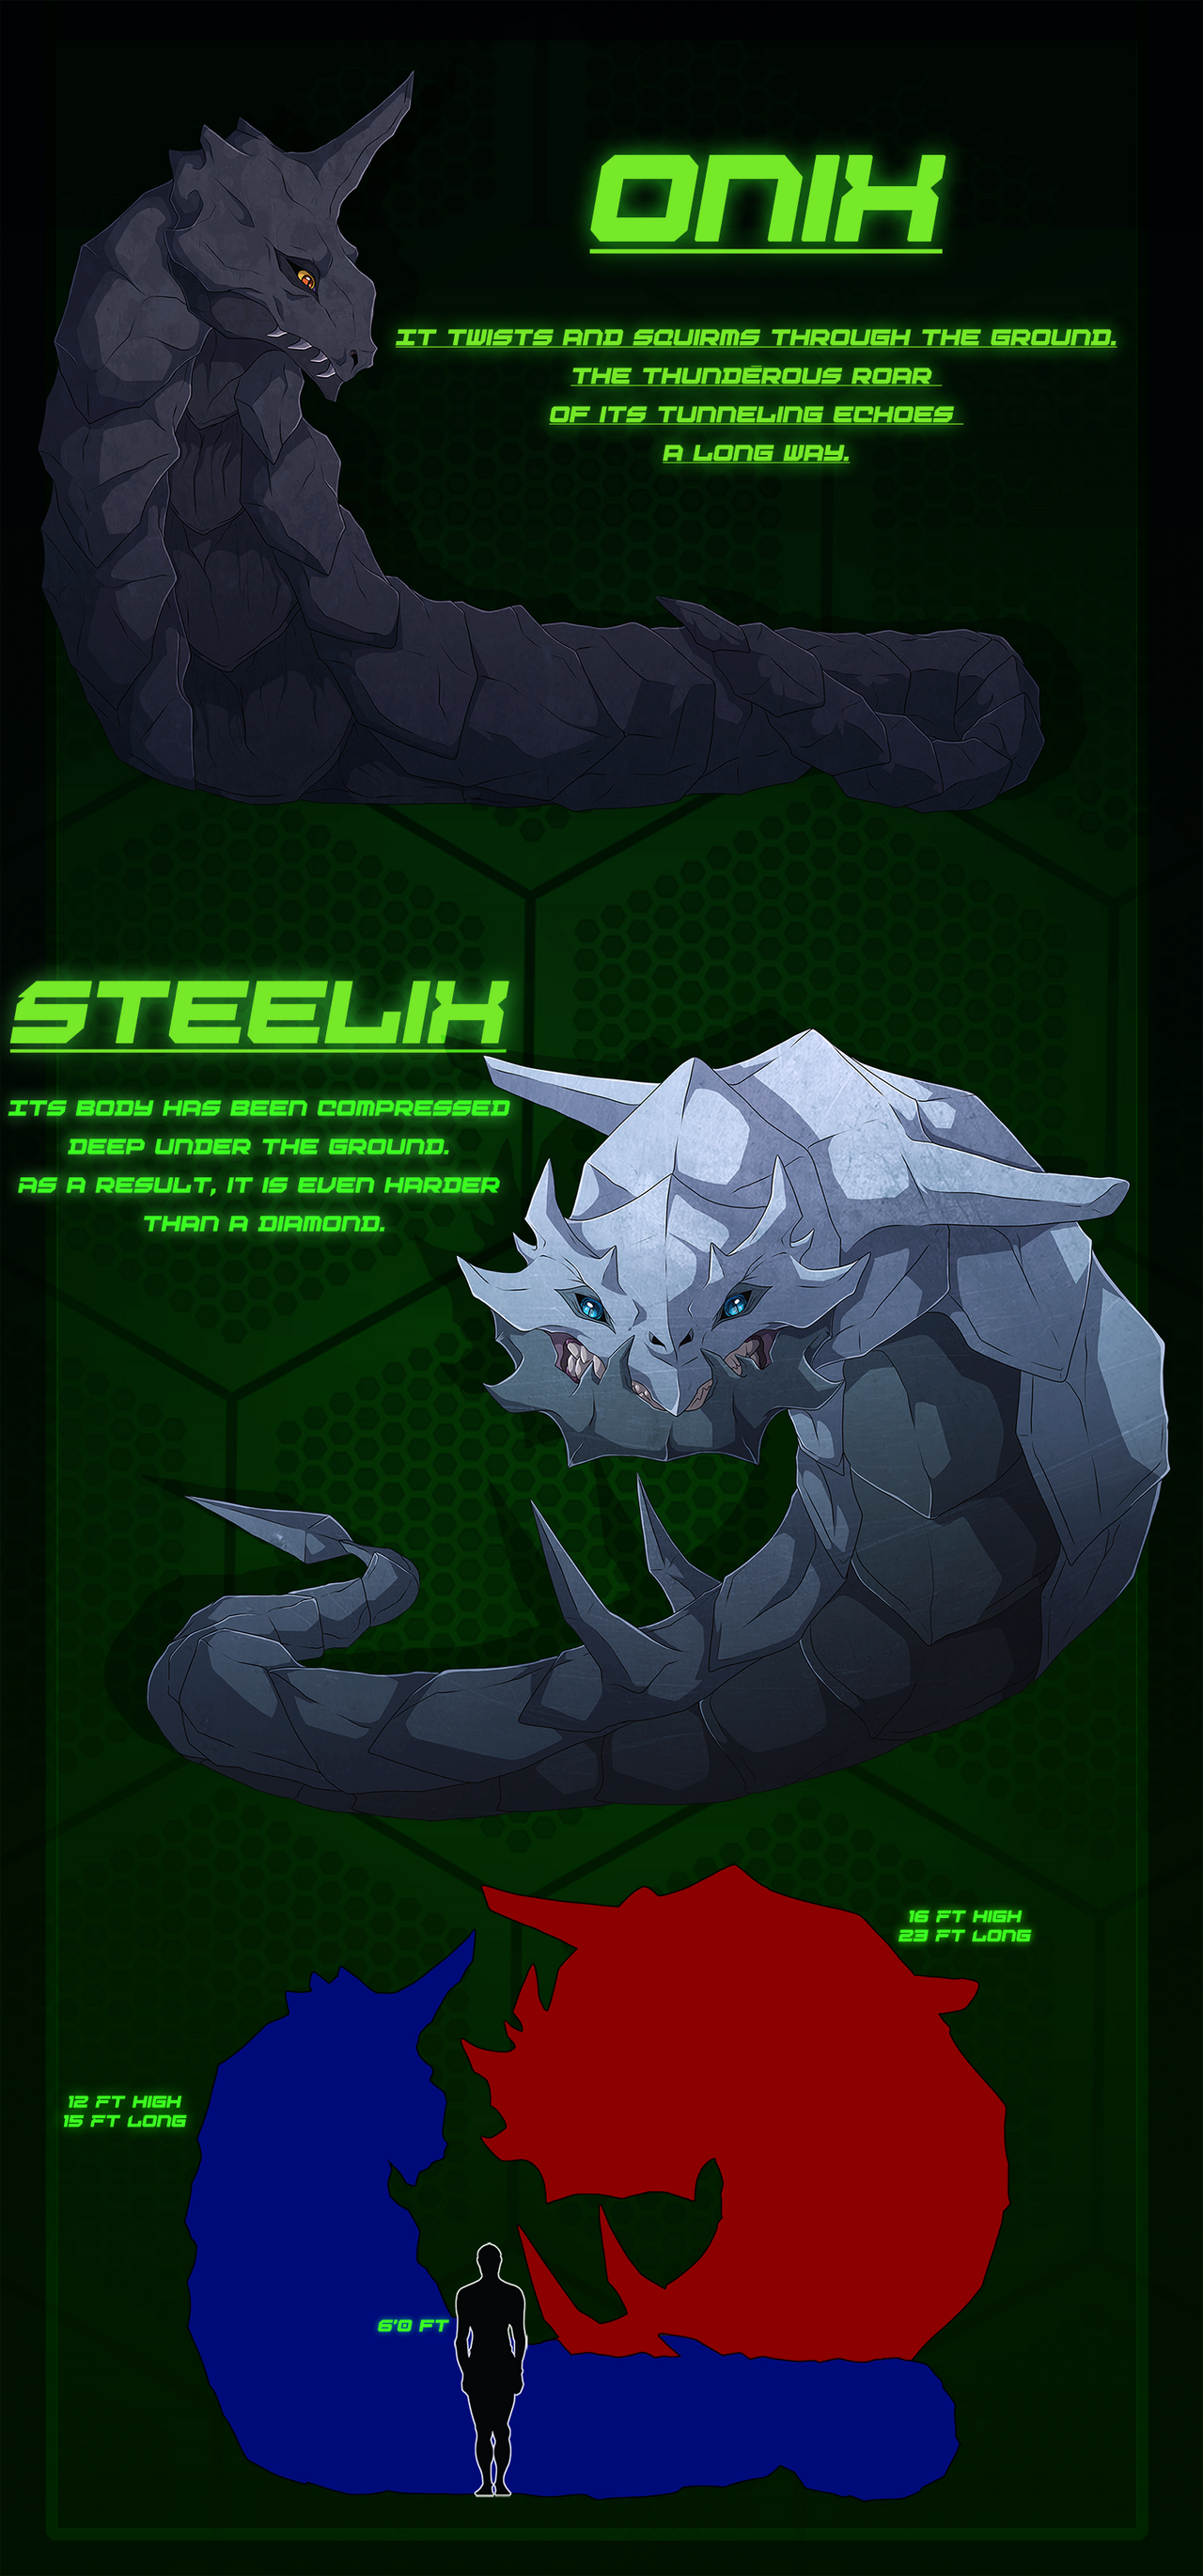 Onix and Steelix- The rock and iron serpents